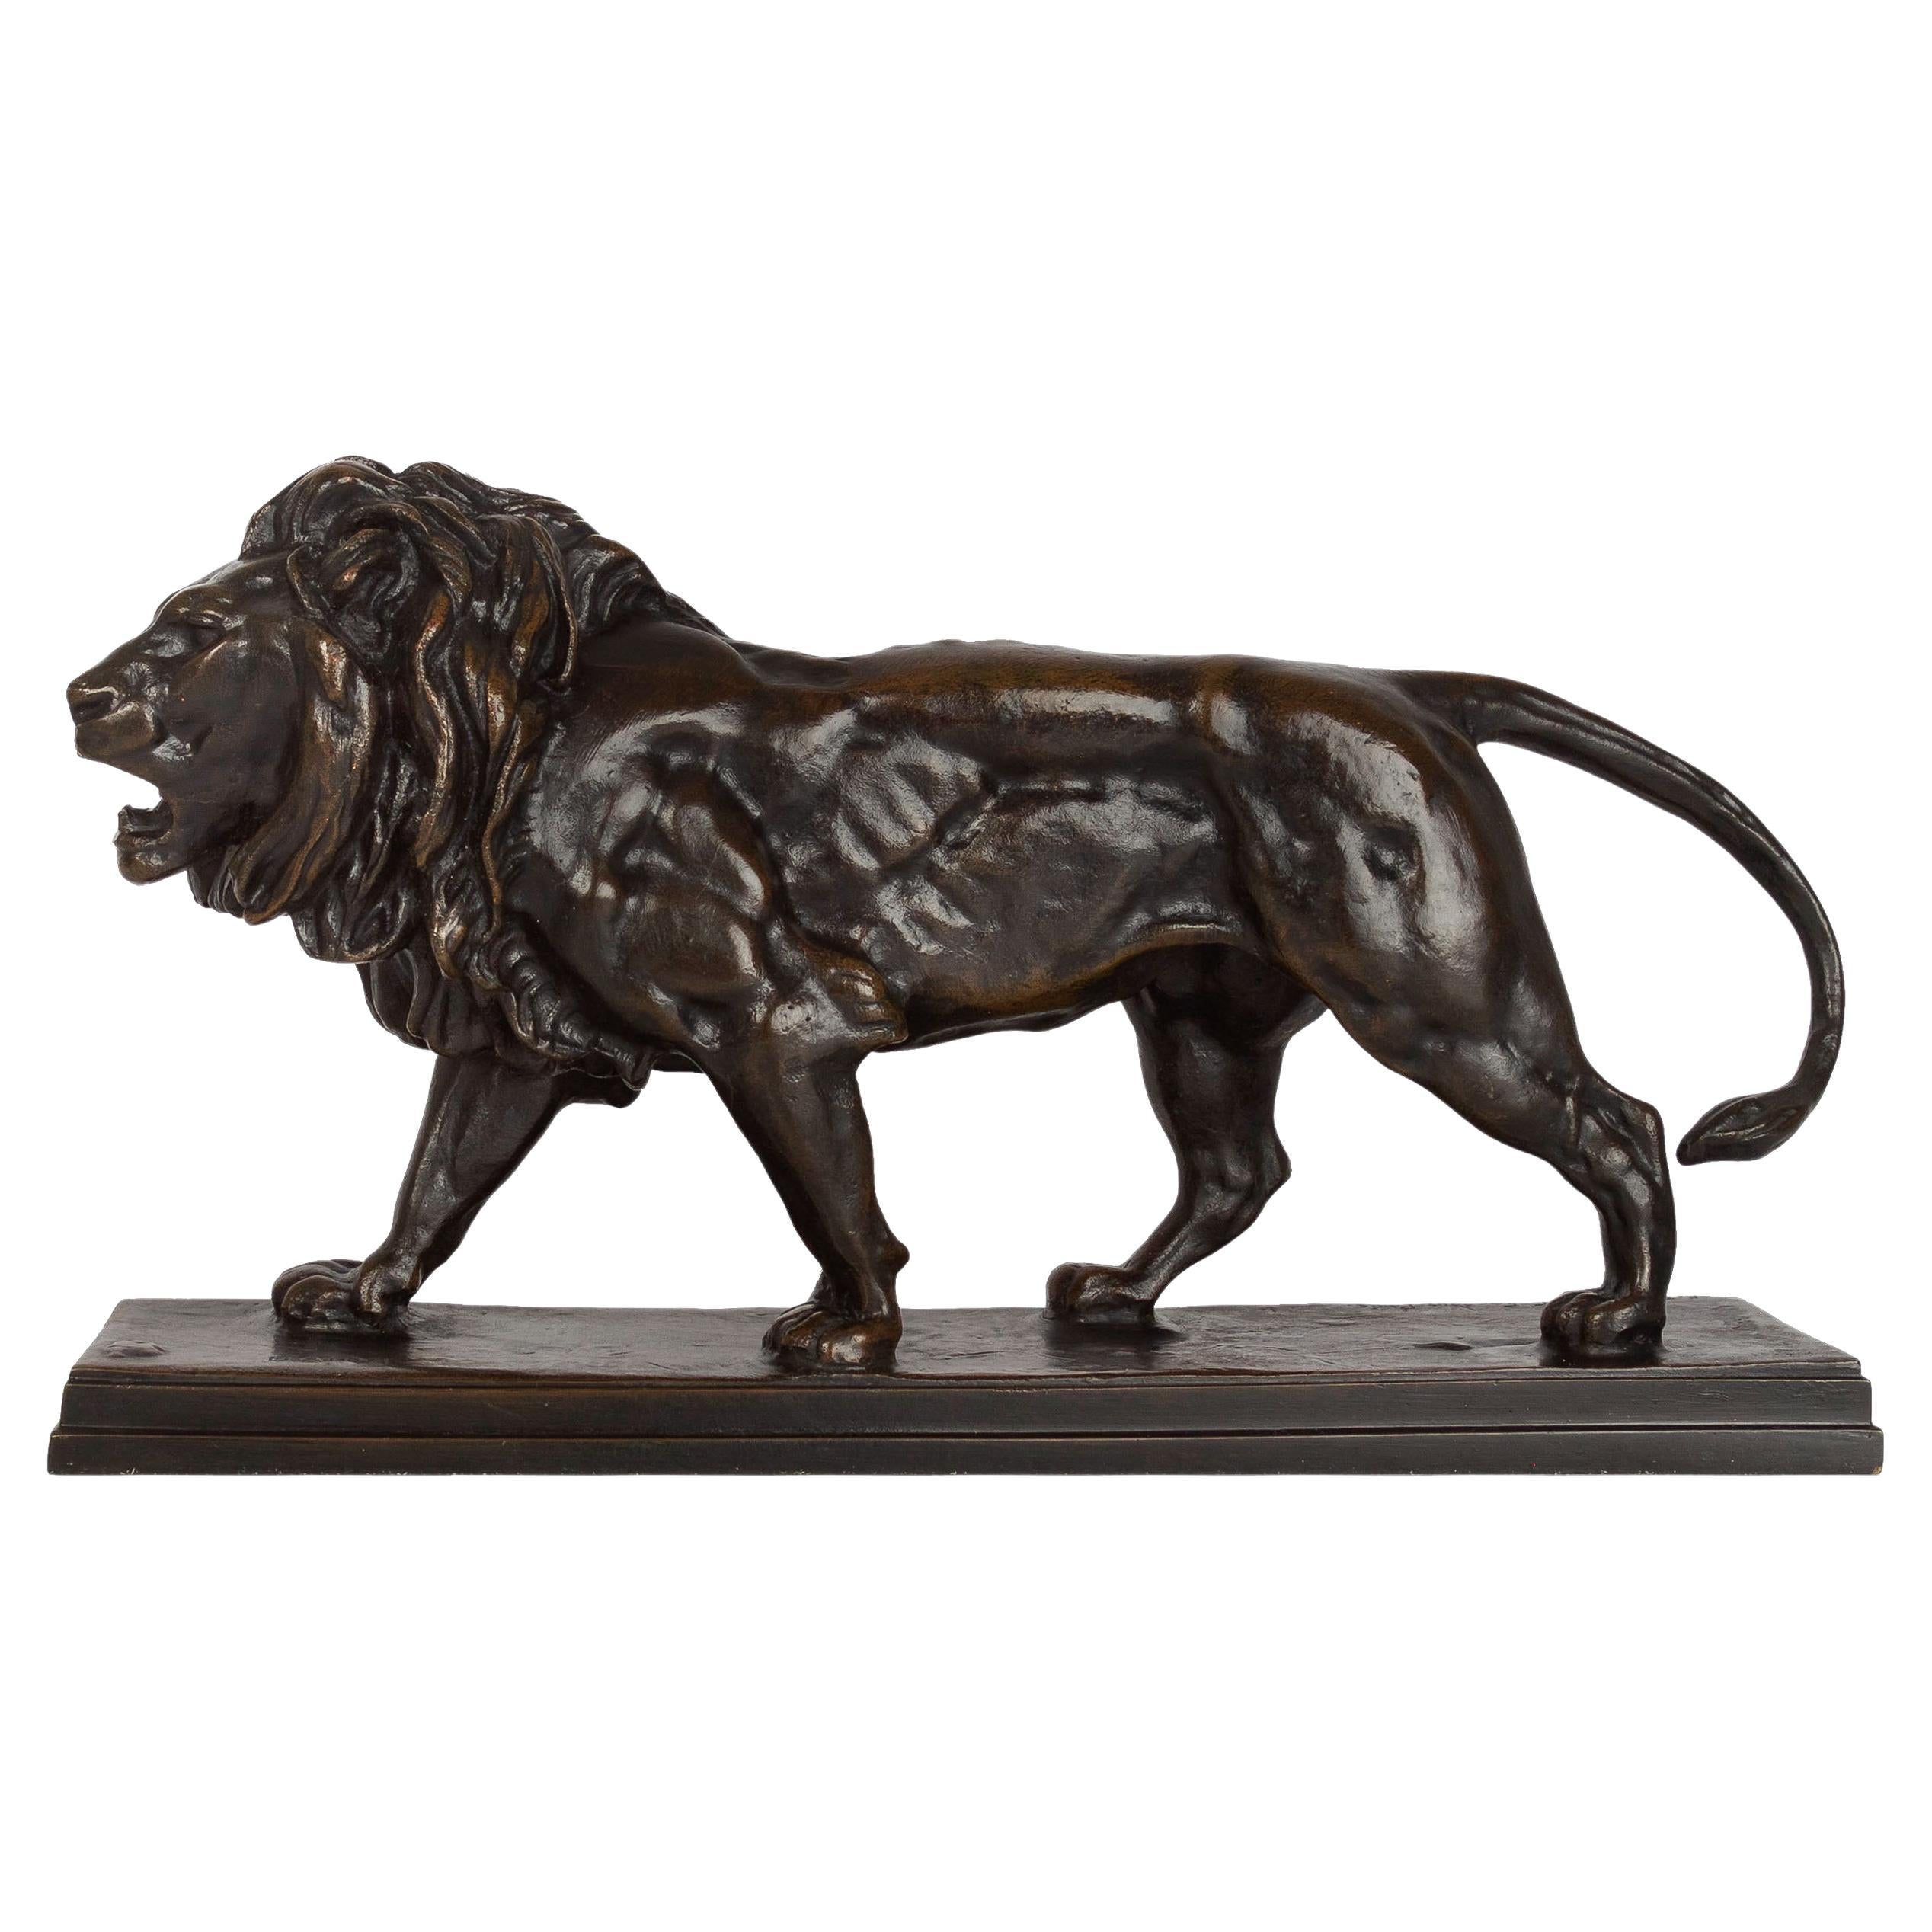 French Bronze Sculpture"Lion Qui Marche"after Antoine-Louis Barye & Barbedienne	